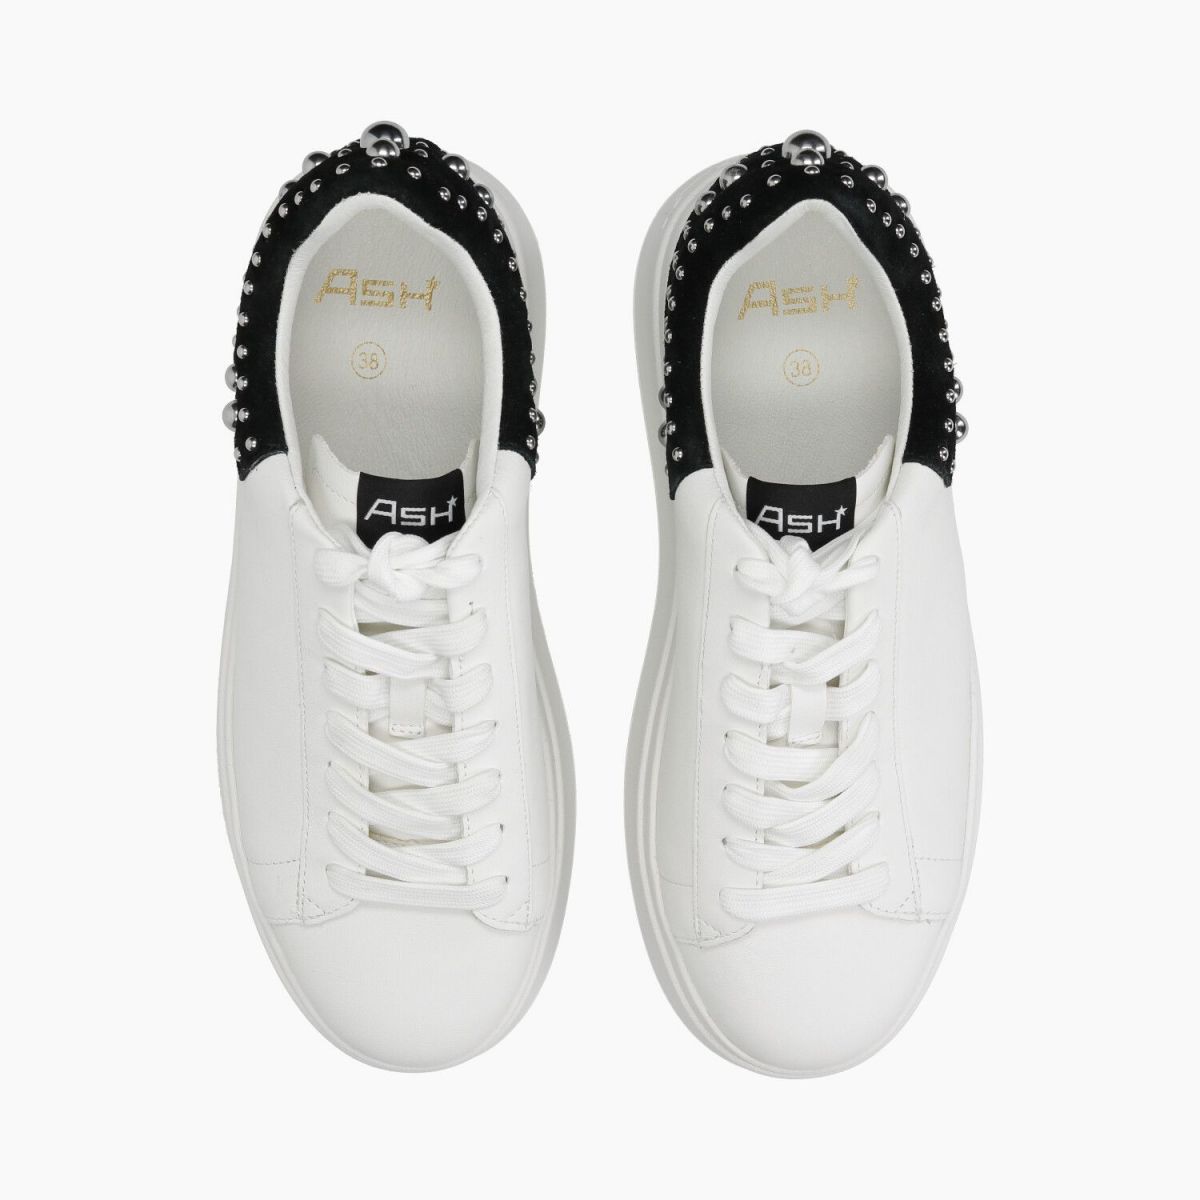 Sneakers Moby Studs